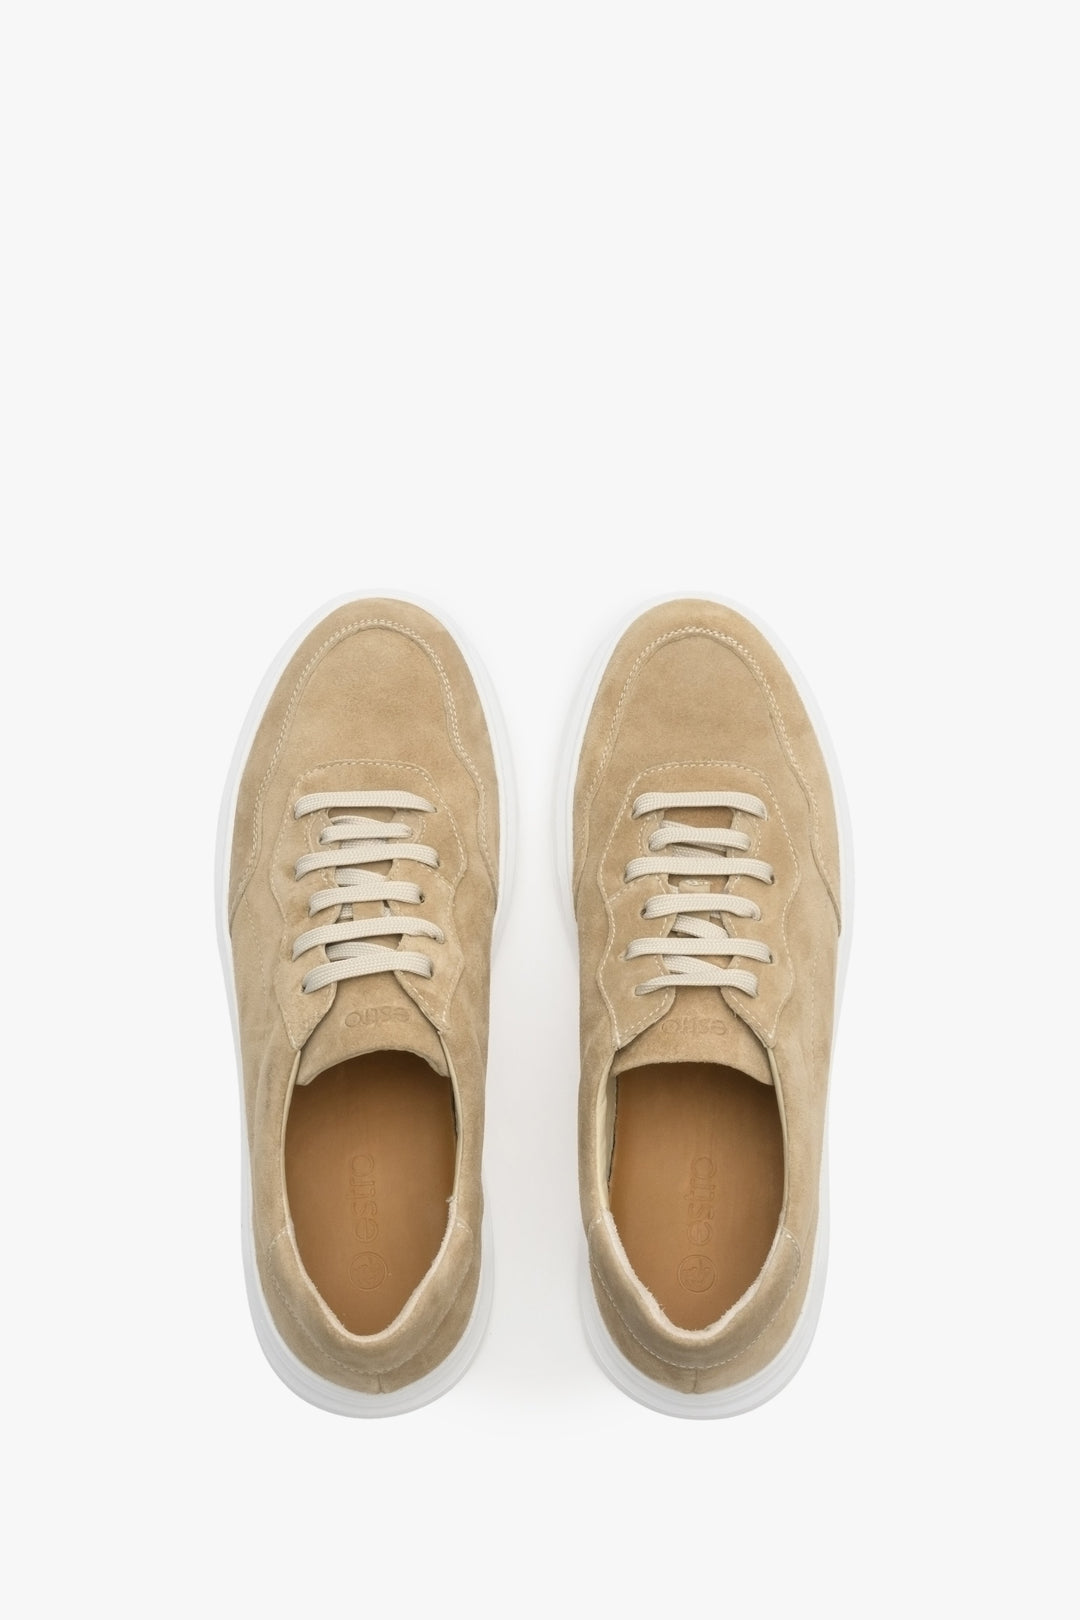 Sand beige velour Estro men's sneakers in with lacing for spring - presentation of the model from above.